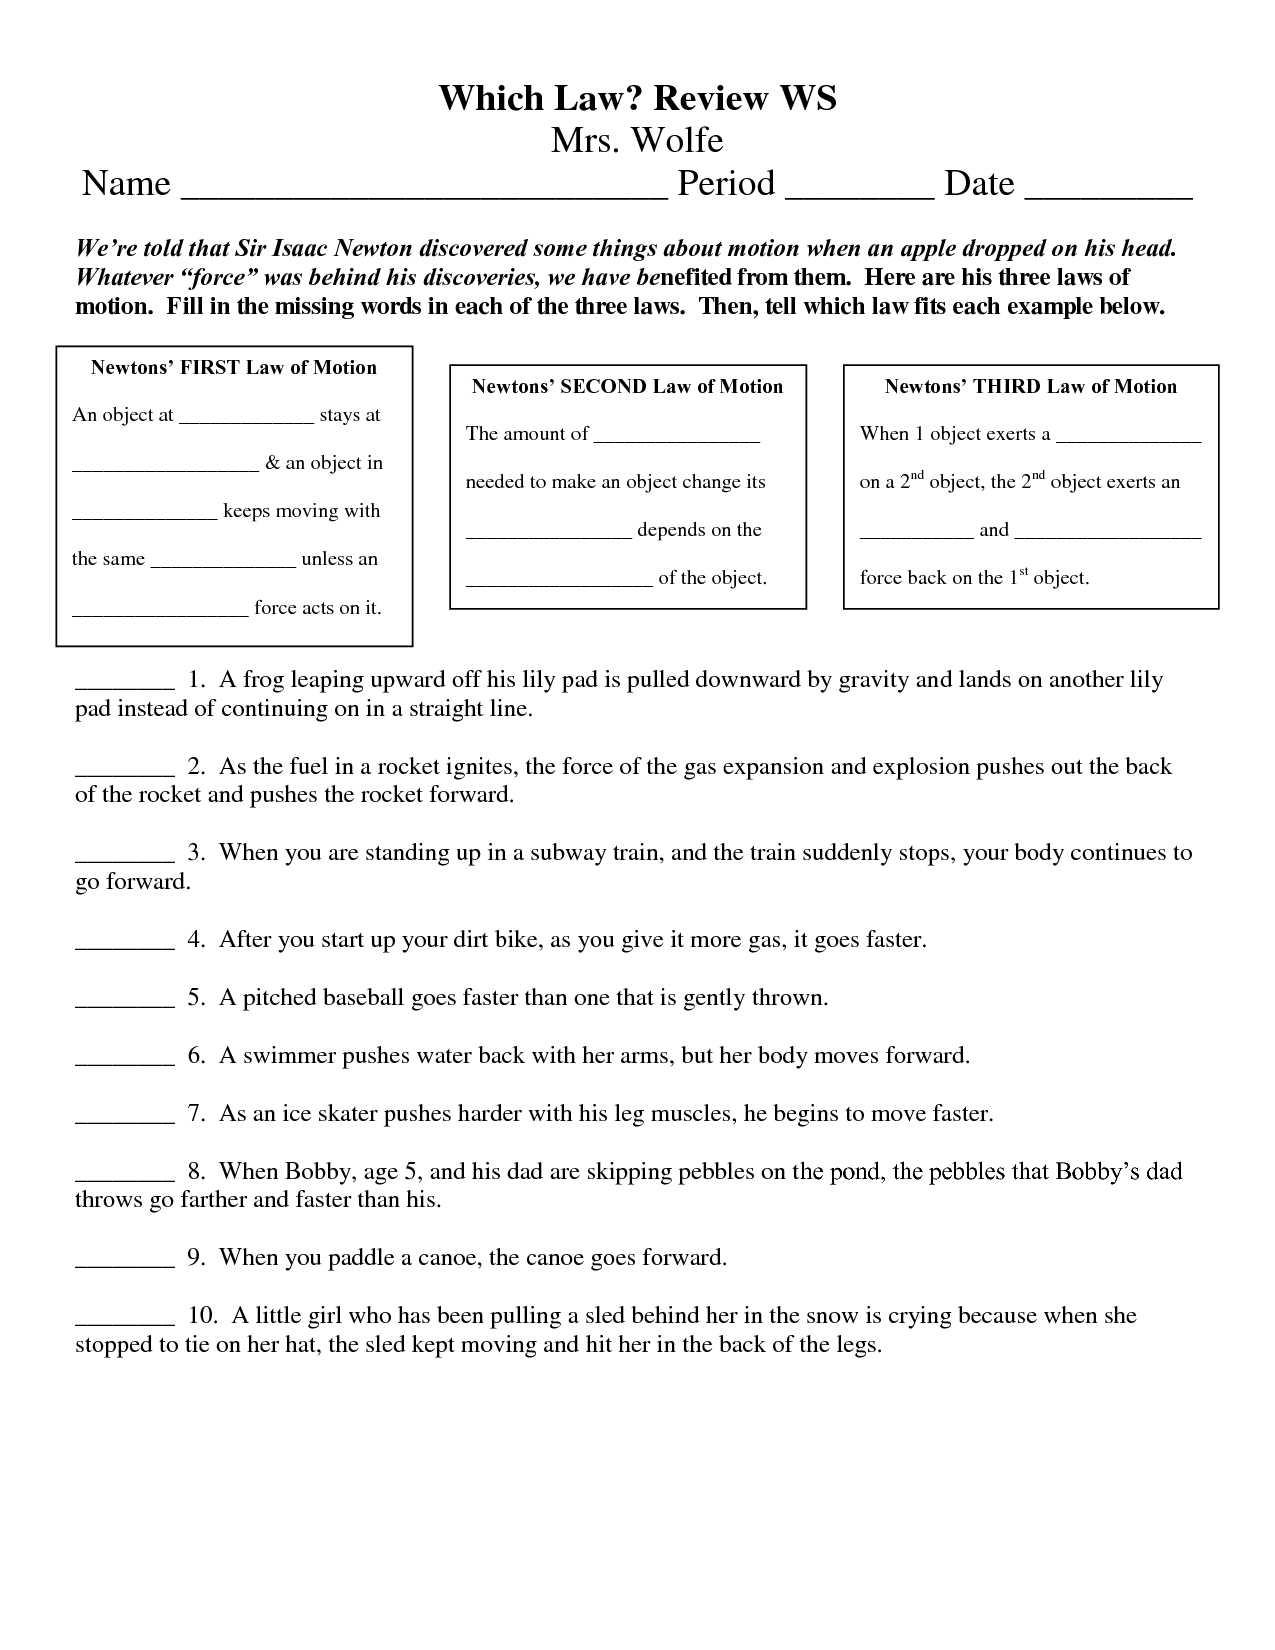 Gas Laws Practice Worksheet Also 3 Laws Of Motion Worksheets